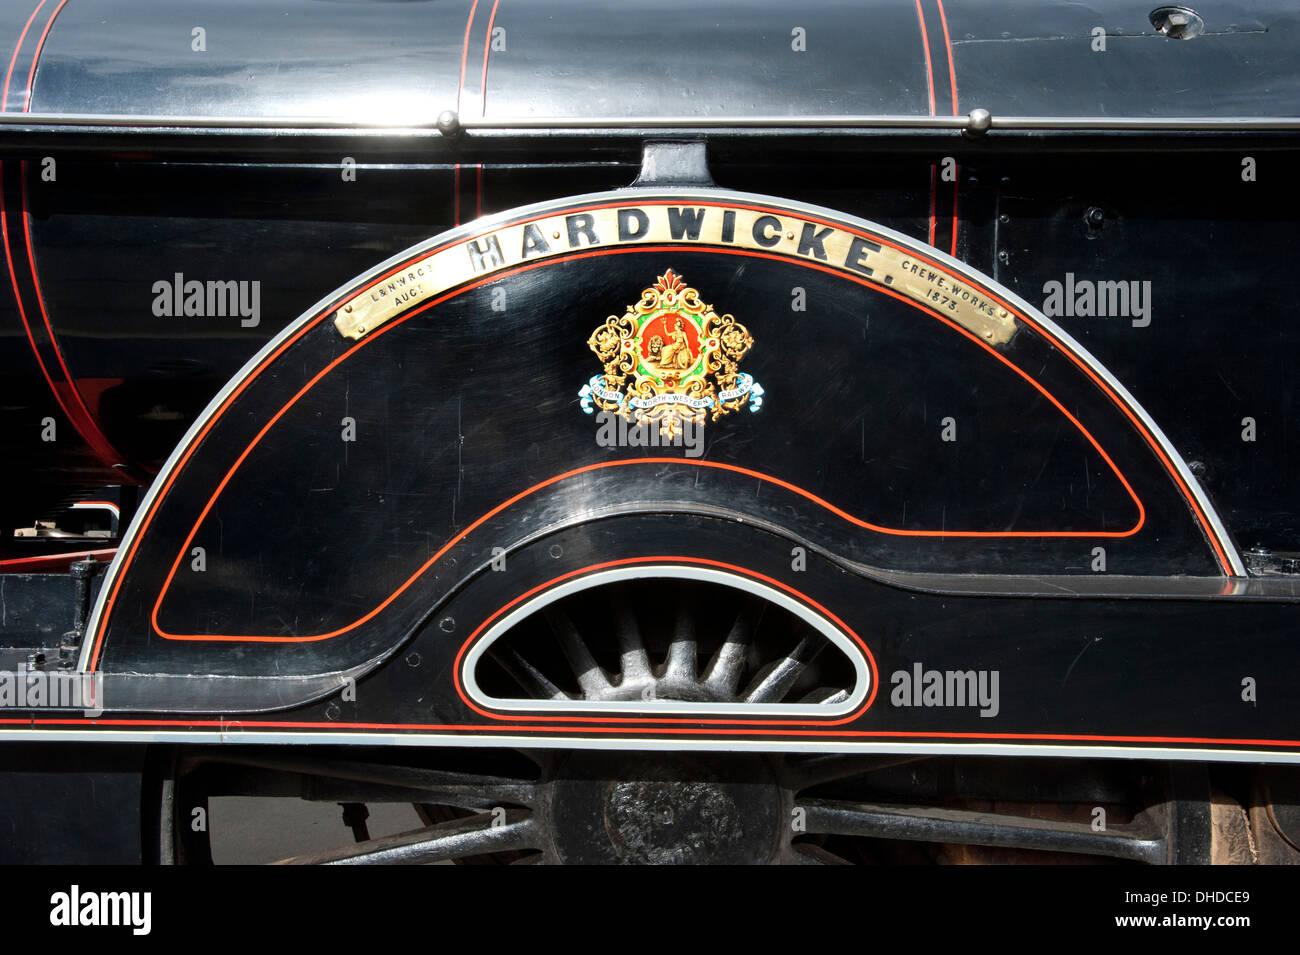 The Nameplate and Coat of Arms on the wheel splasher of L&NWR (london & North Western Railway) steam locomtive No 790 'HARDWICKE' Stock Photo